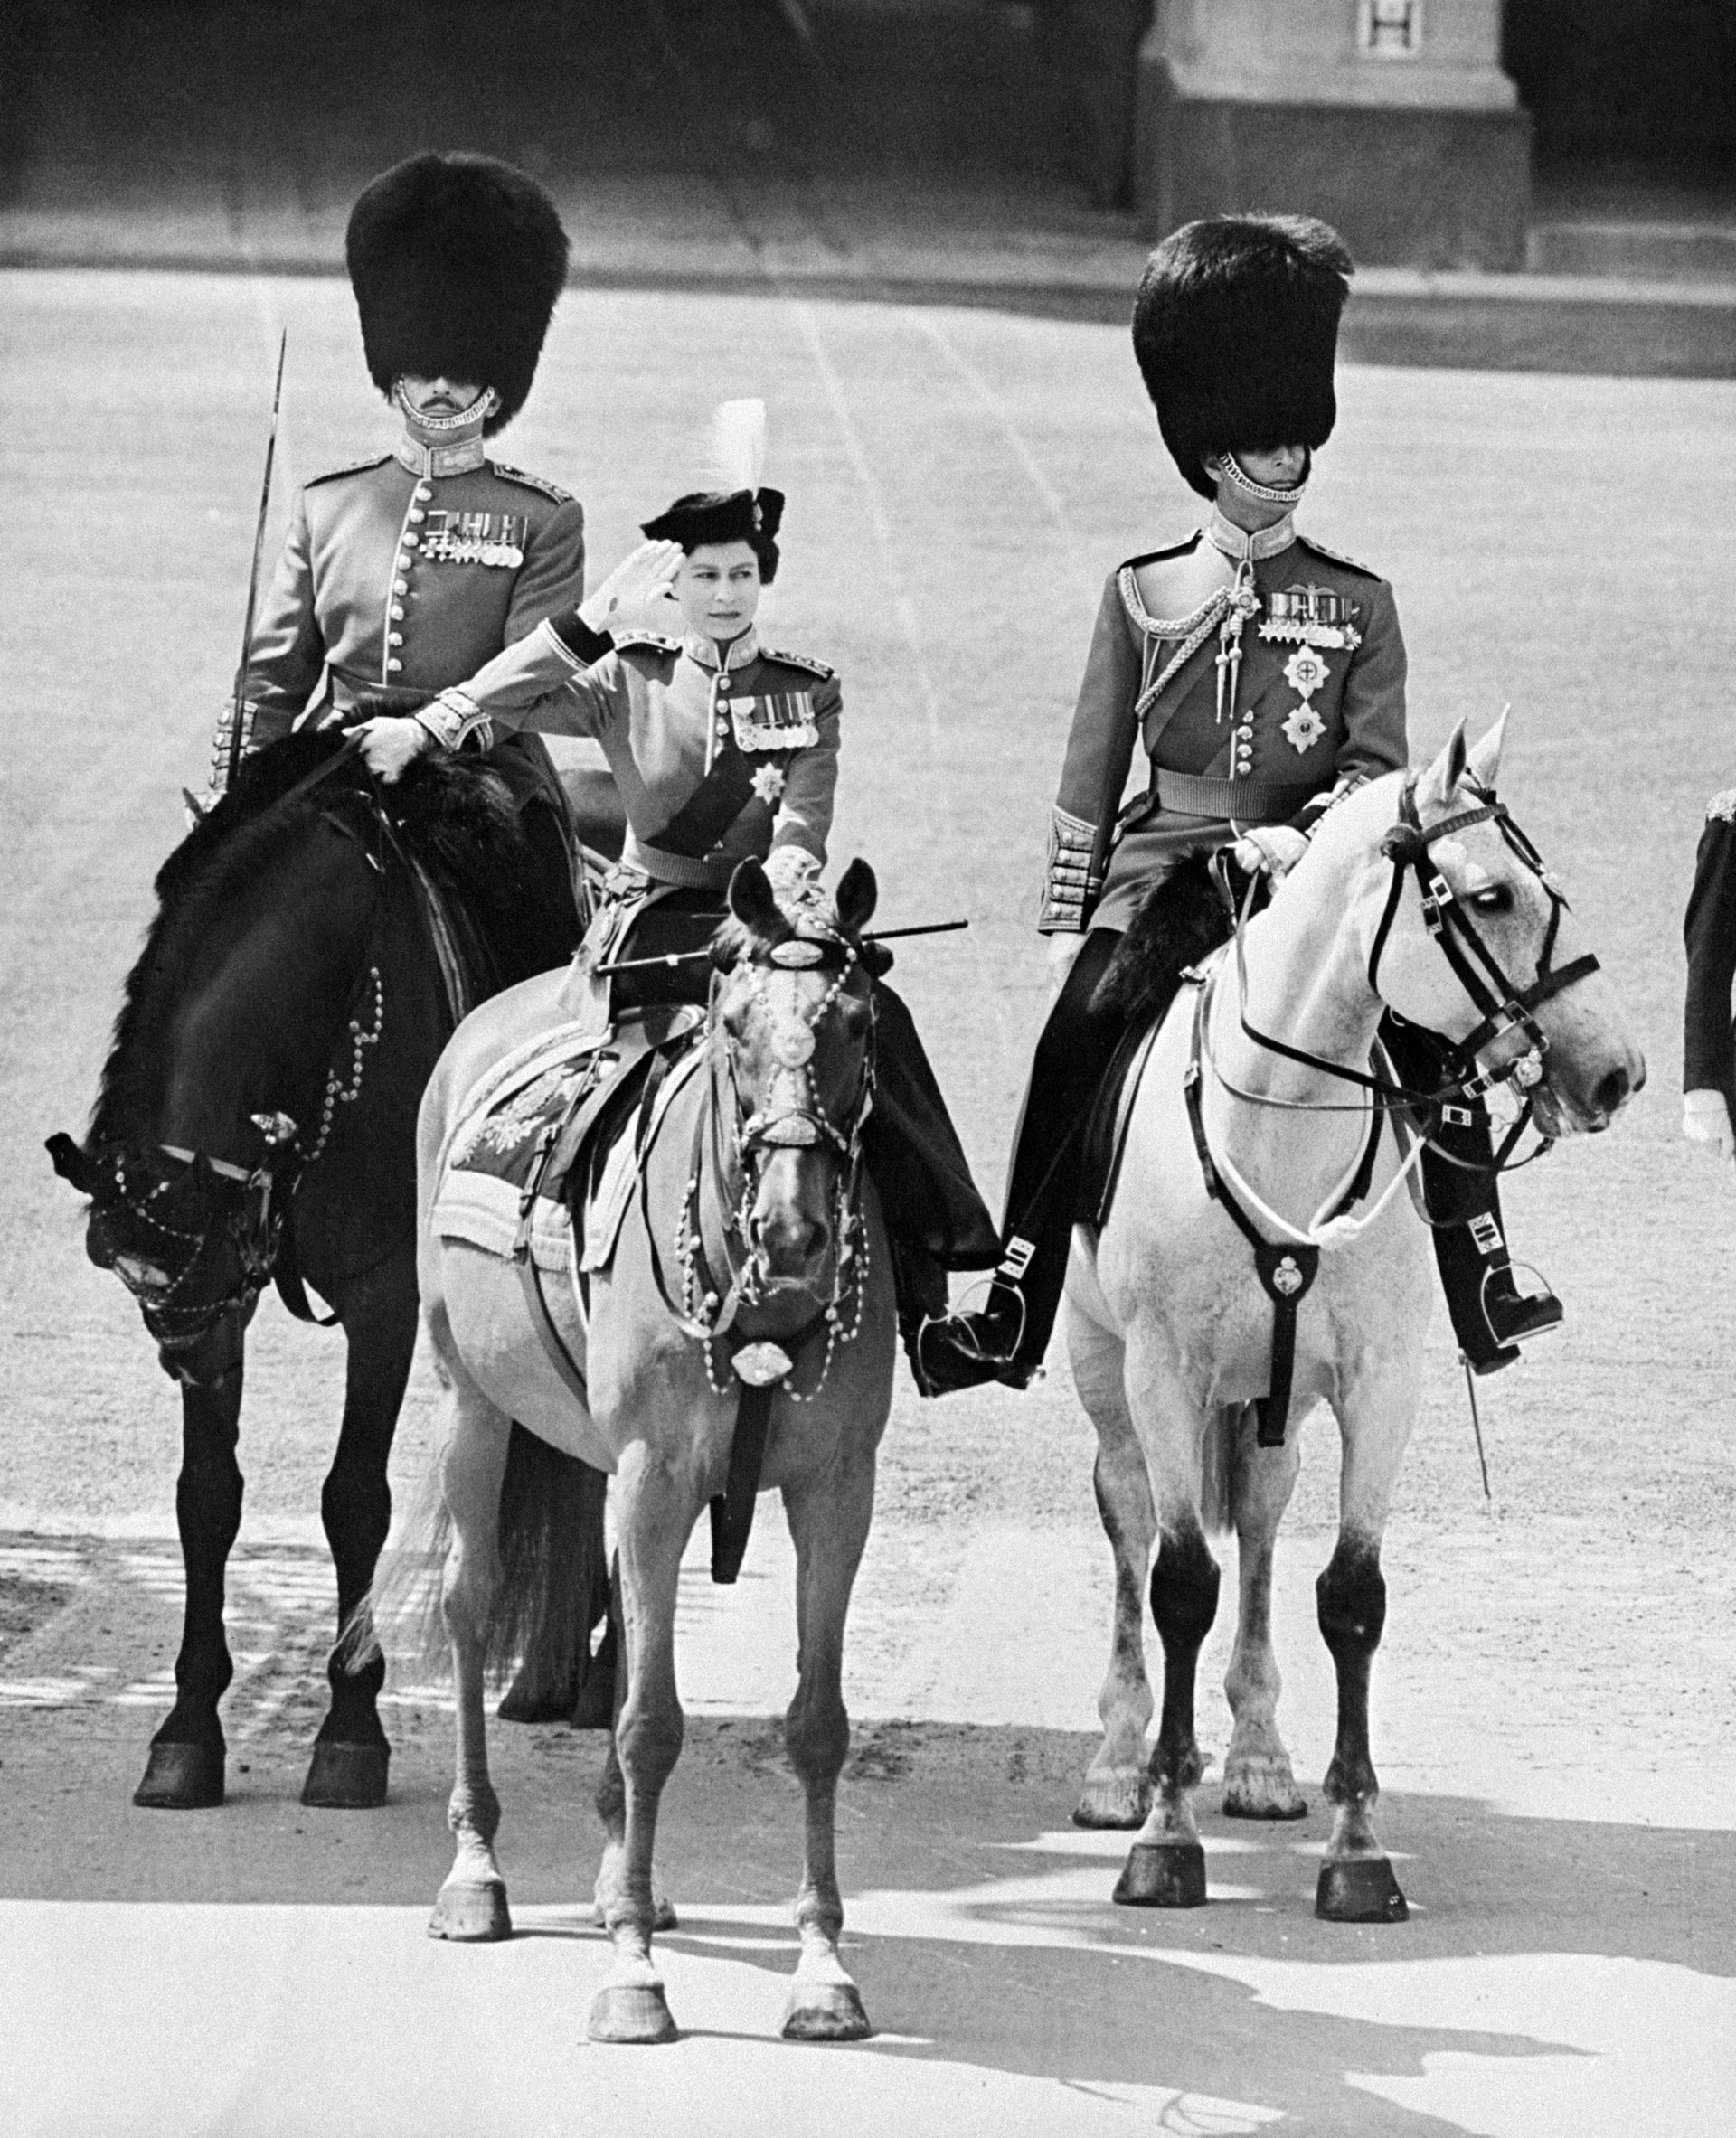 Elizabeth trooping the colour